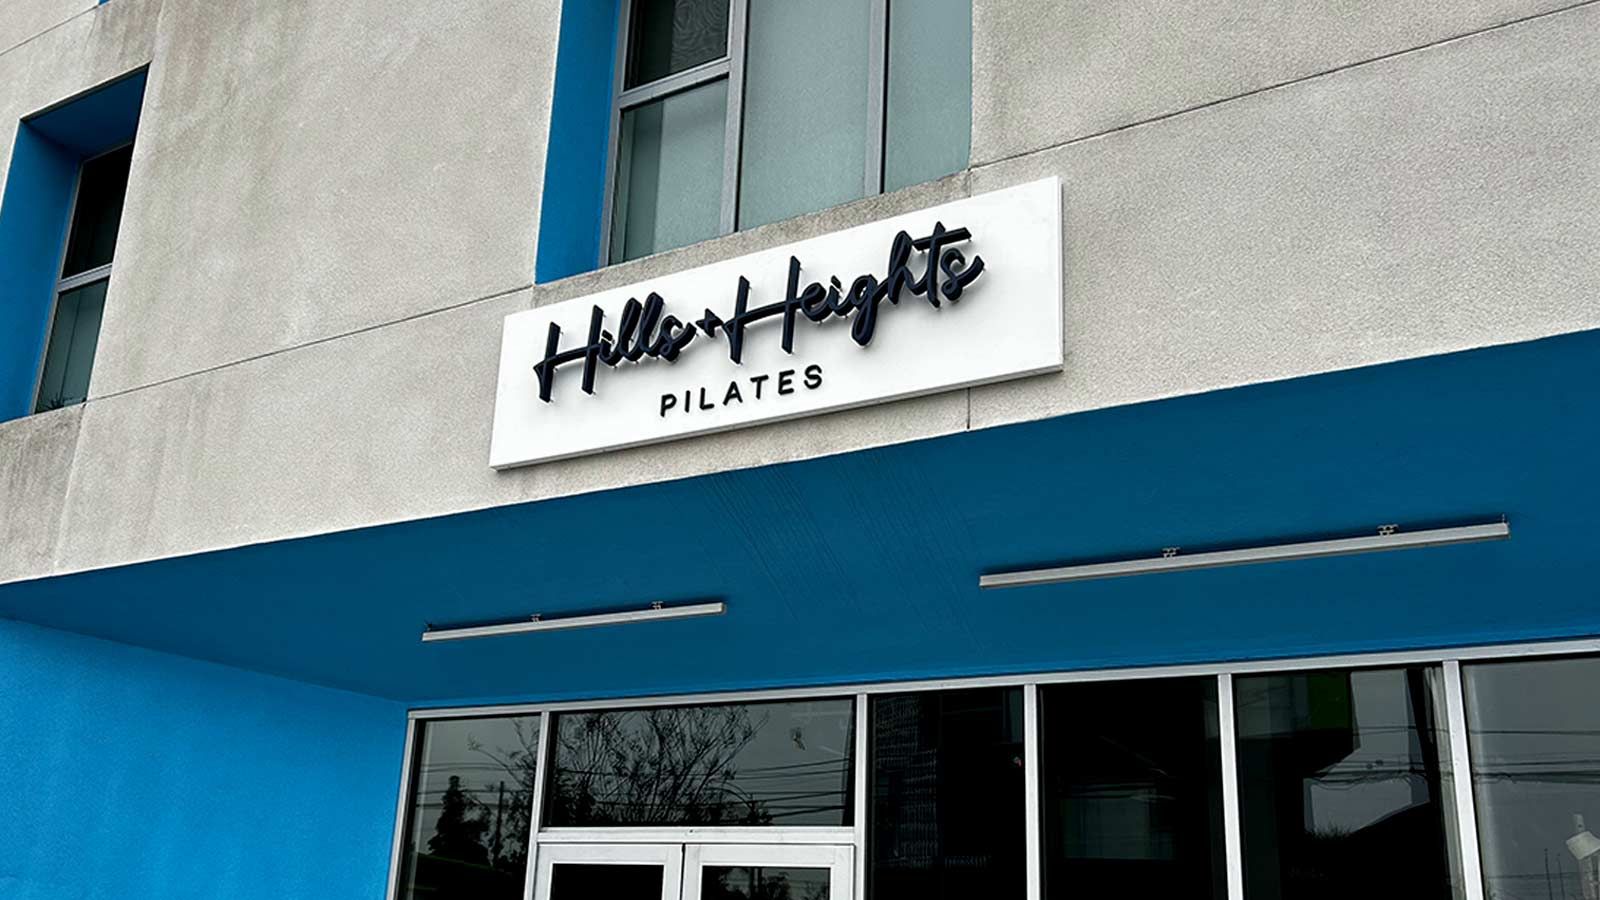 Hills and Heights Pilates outdoor sign on the facade